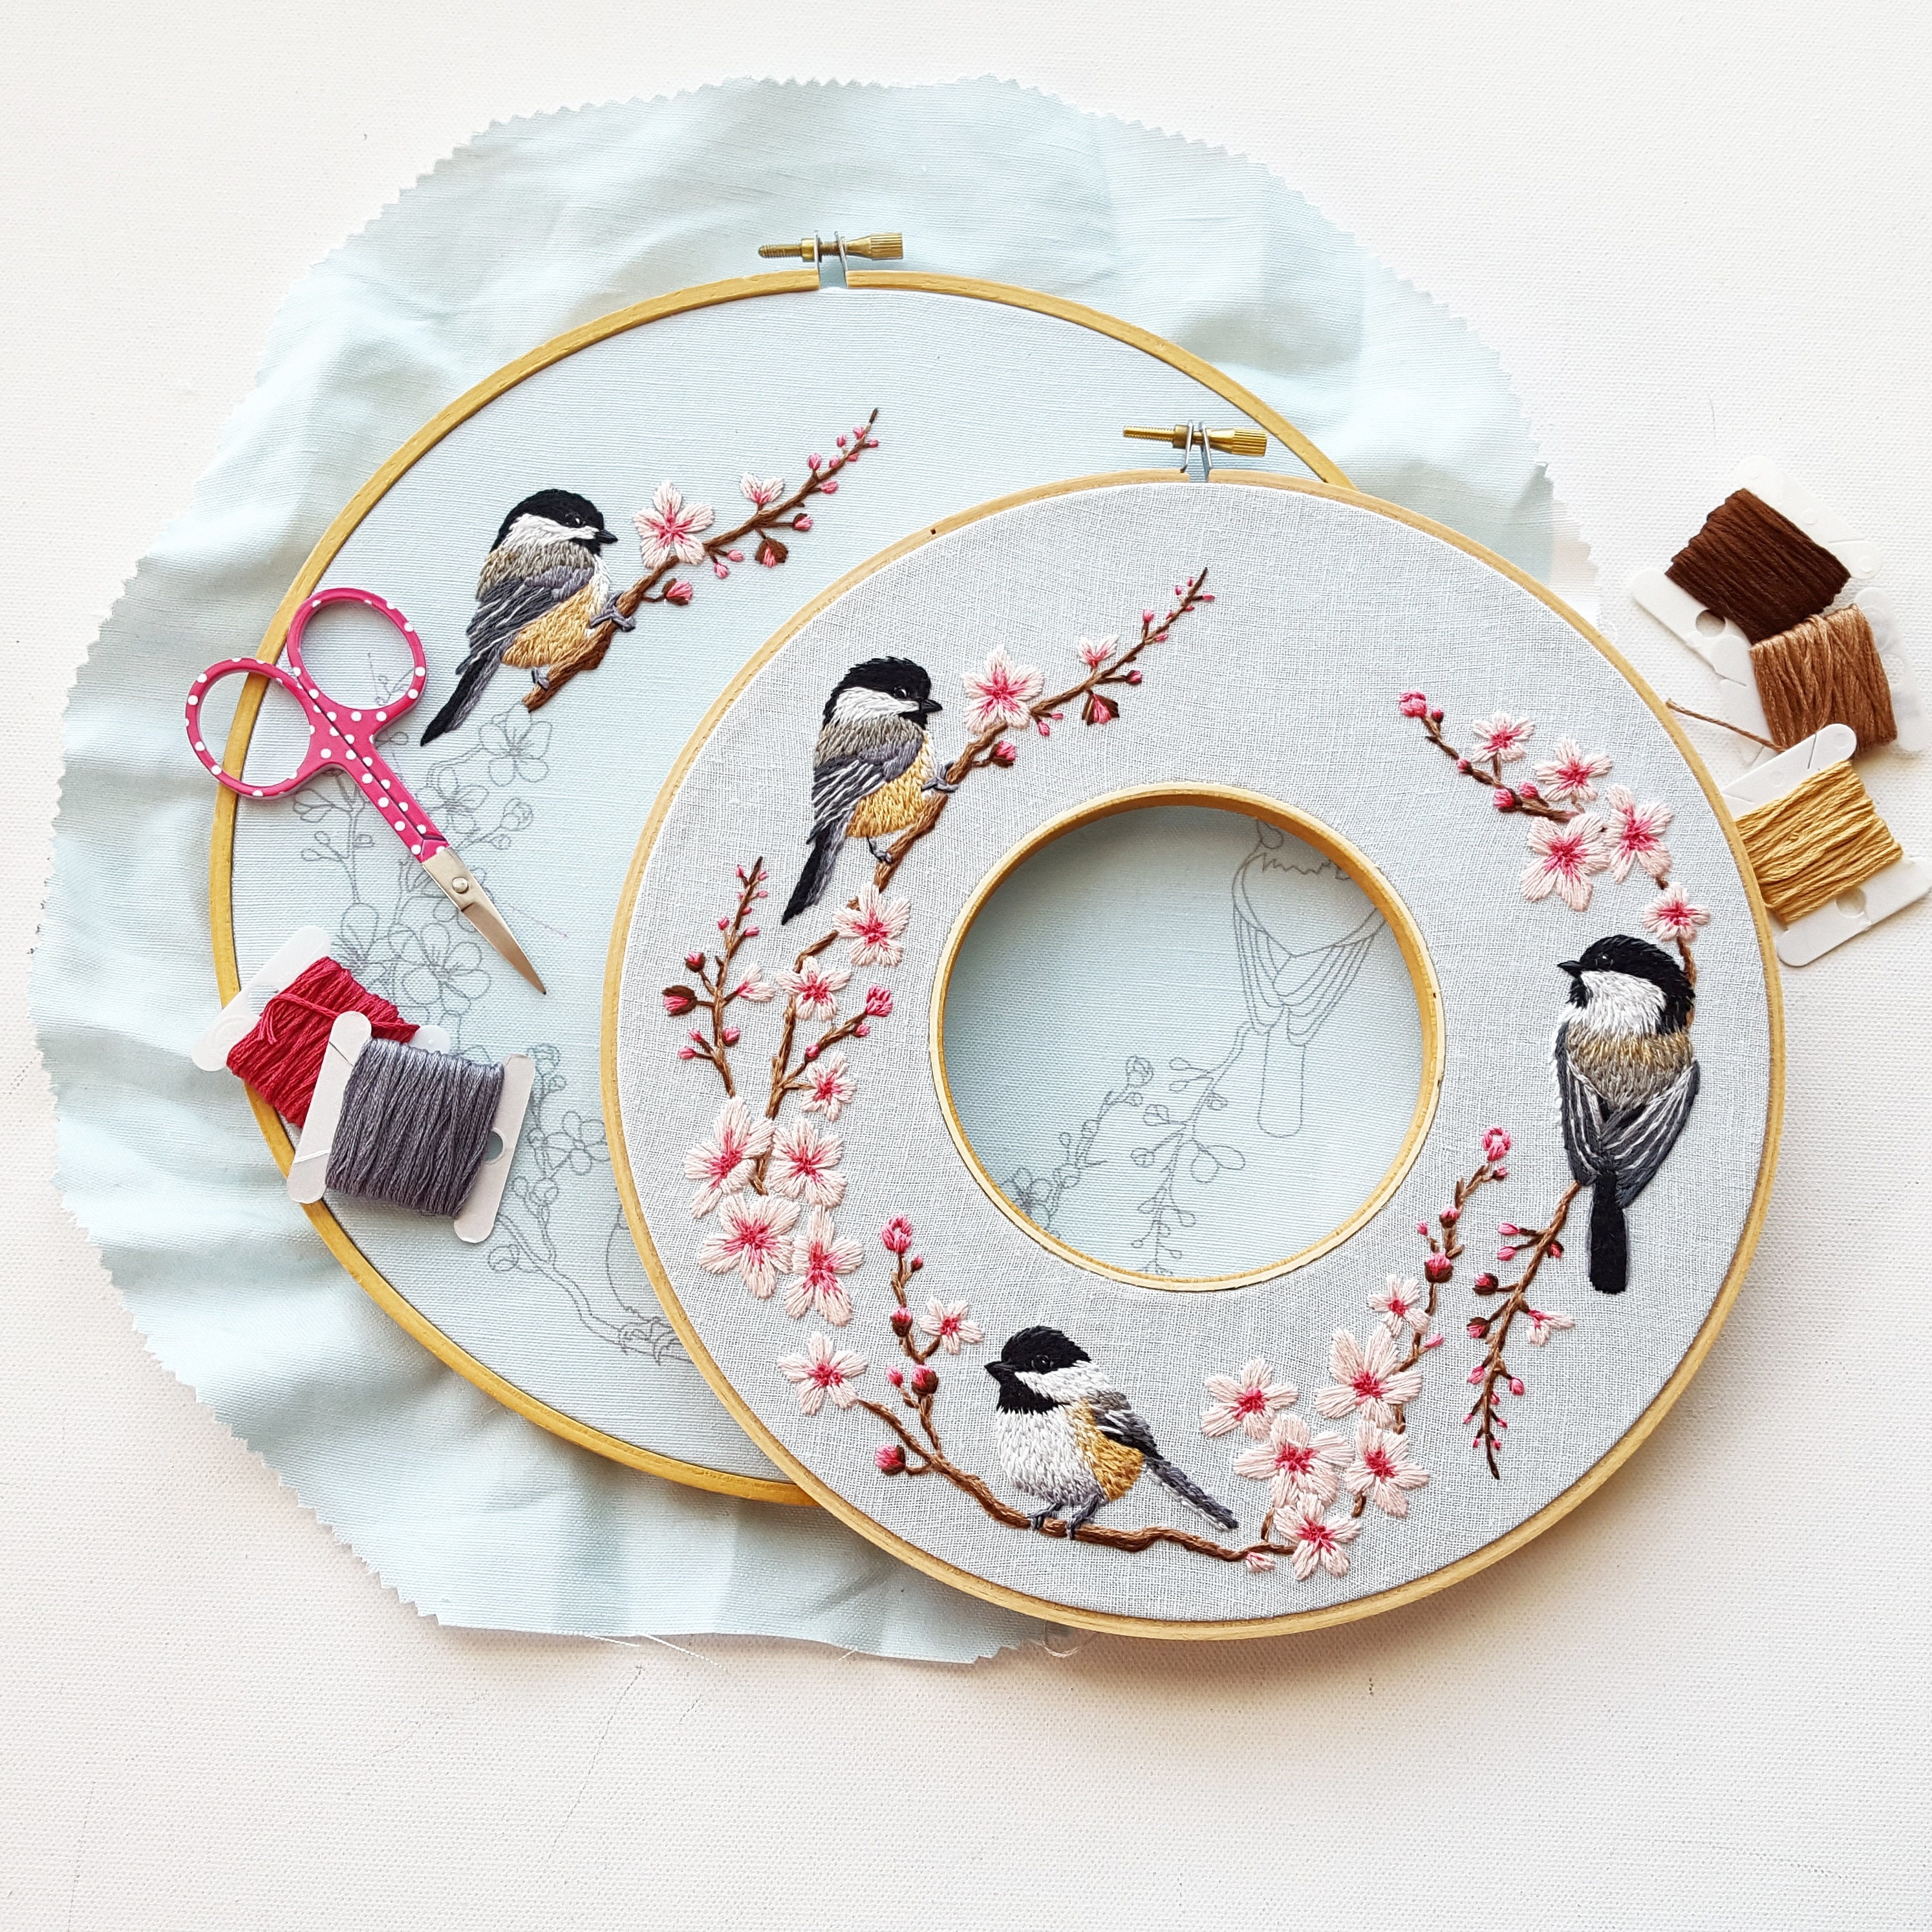 BERYA Embroidery Kit Including Embroidery Hoop Color Threads and